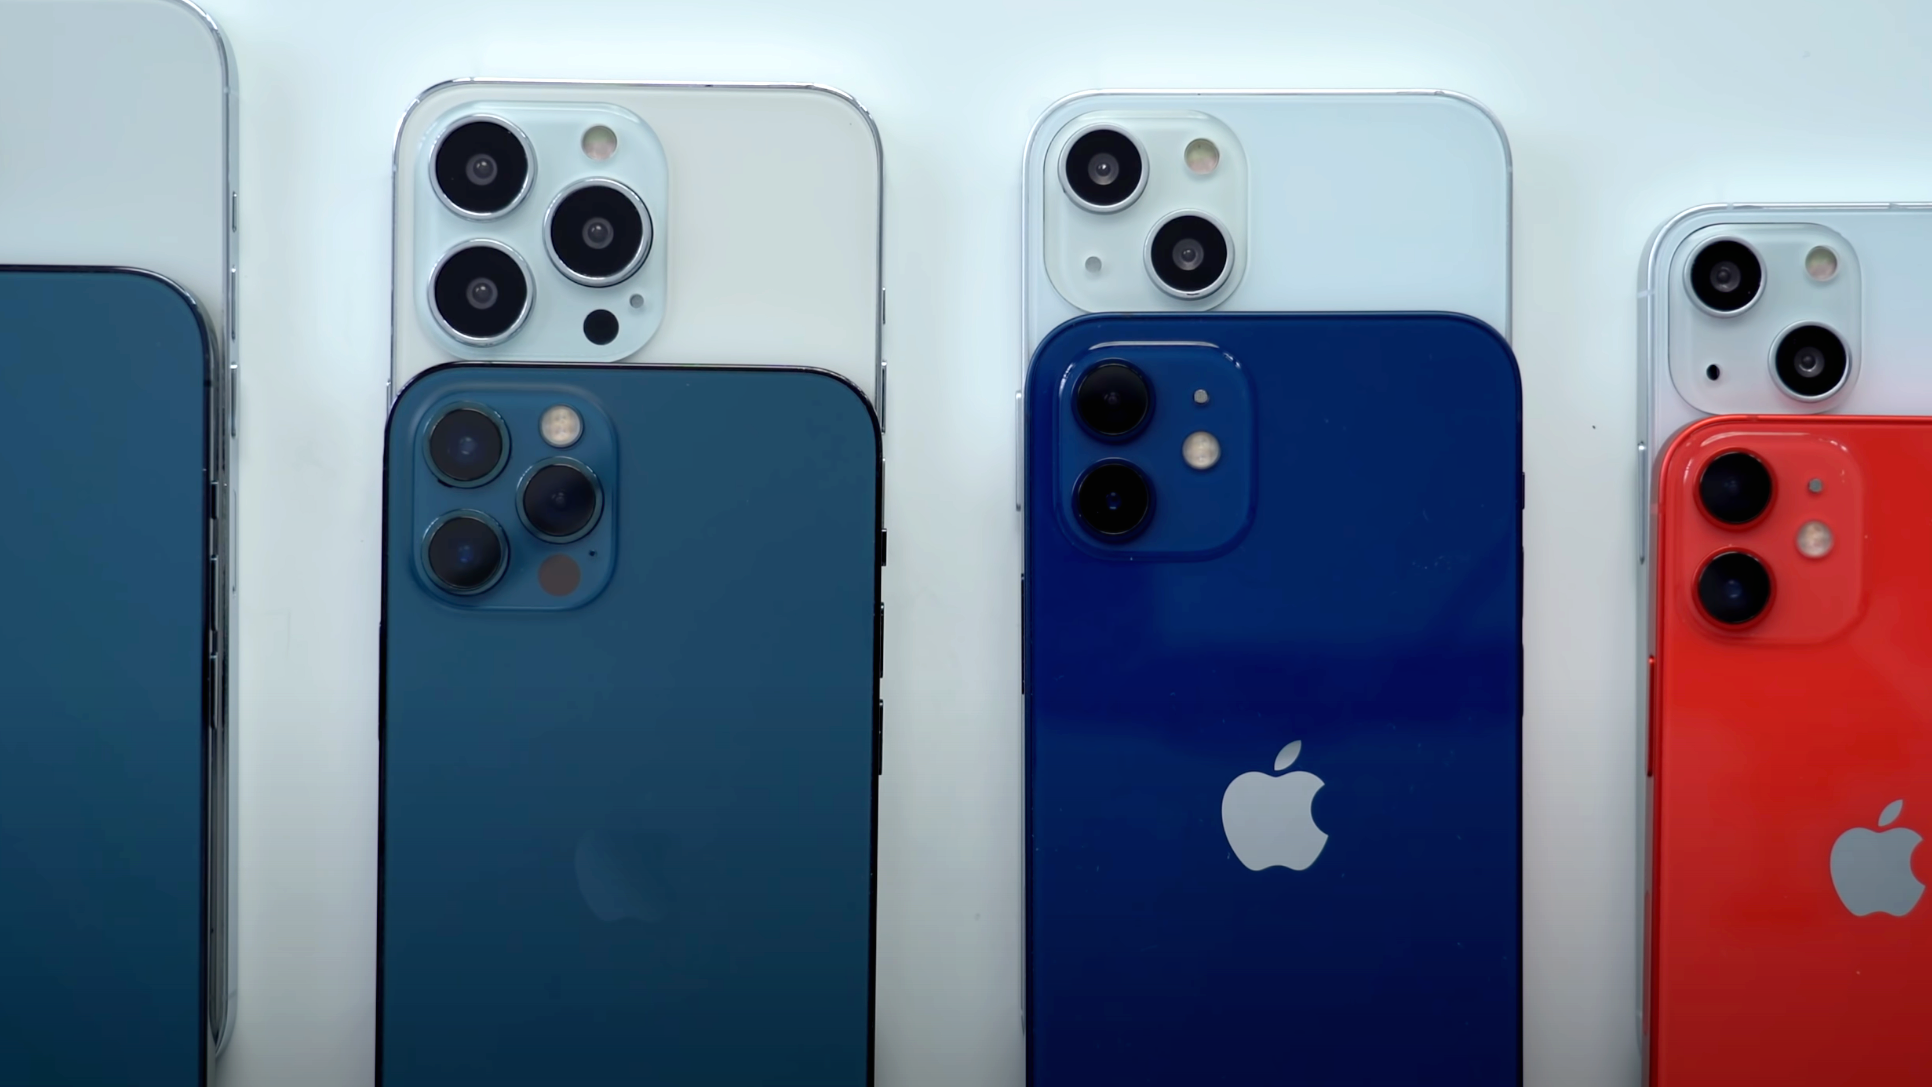 Uuuuh… We certainly hope so! Image courtesy of MacRumors. - Flaregate: Will iPhone 13 fix the biggest iPhone 12 camera problem?